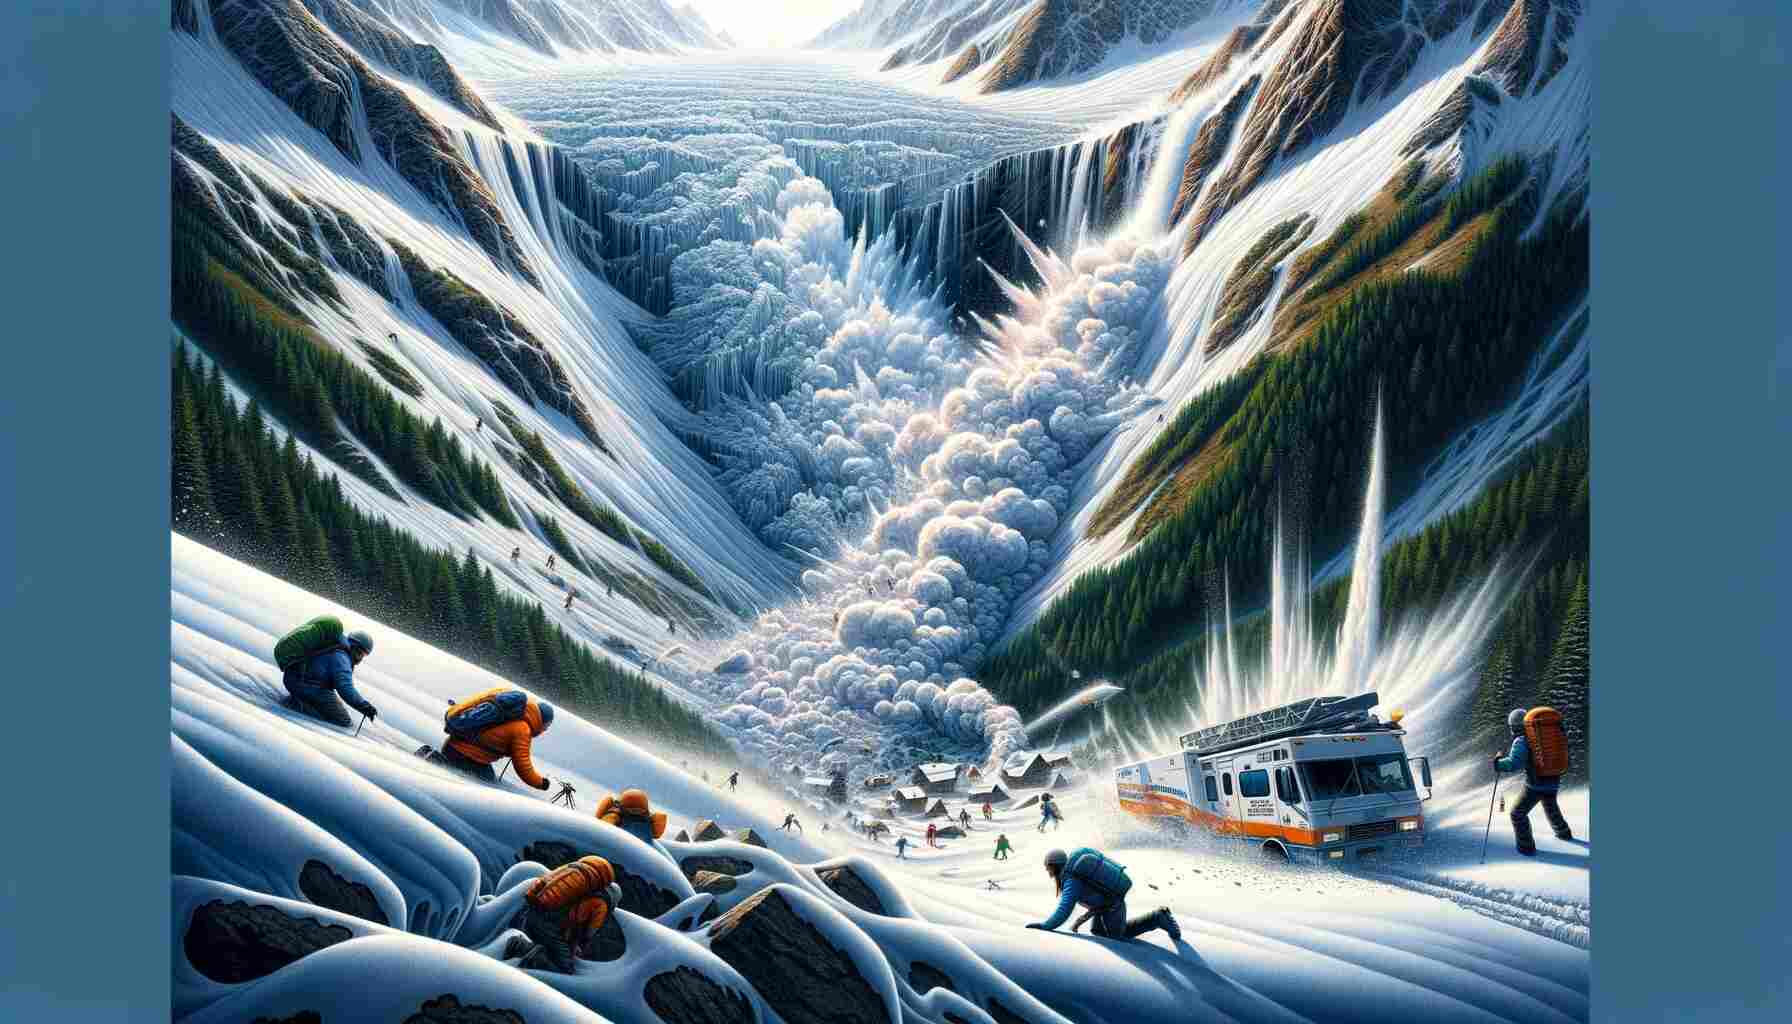 The image depicts a vivid illustration of an avalanche in mountainous terrain, with massive snow and debris cascading down a steep slope. In the foreground, a small group of hikers equipped with safety gear are taking precautions and implementing survival strategies. The scene conveys the power and danger of avalanches, emphasizing the importance of preparedness and knowledge. The title "Understanding Avalanches: Causes, Precautions, and Survival Strategies" is prominently displayed at the top.